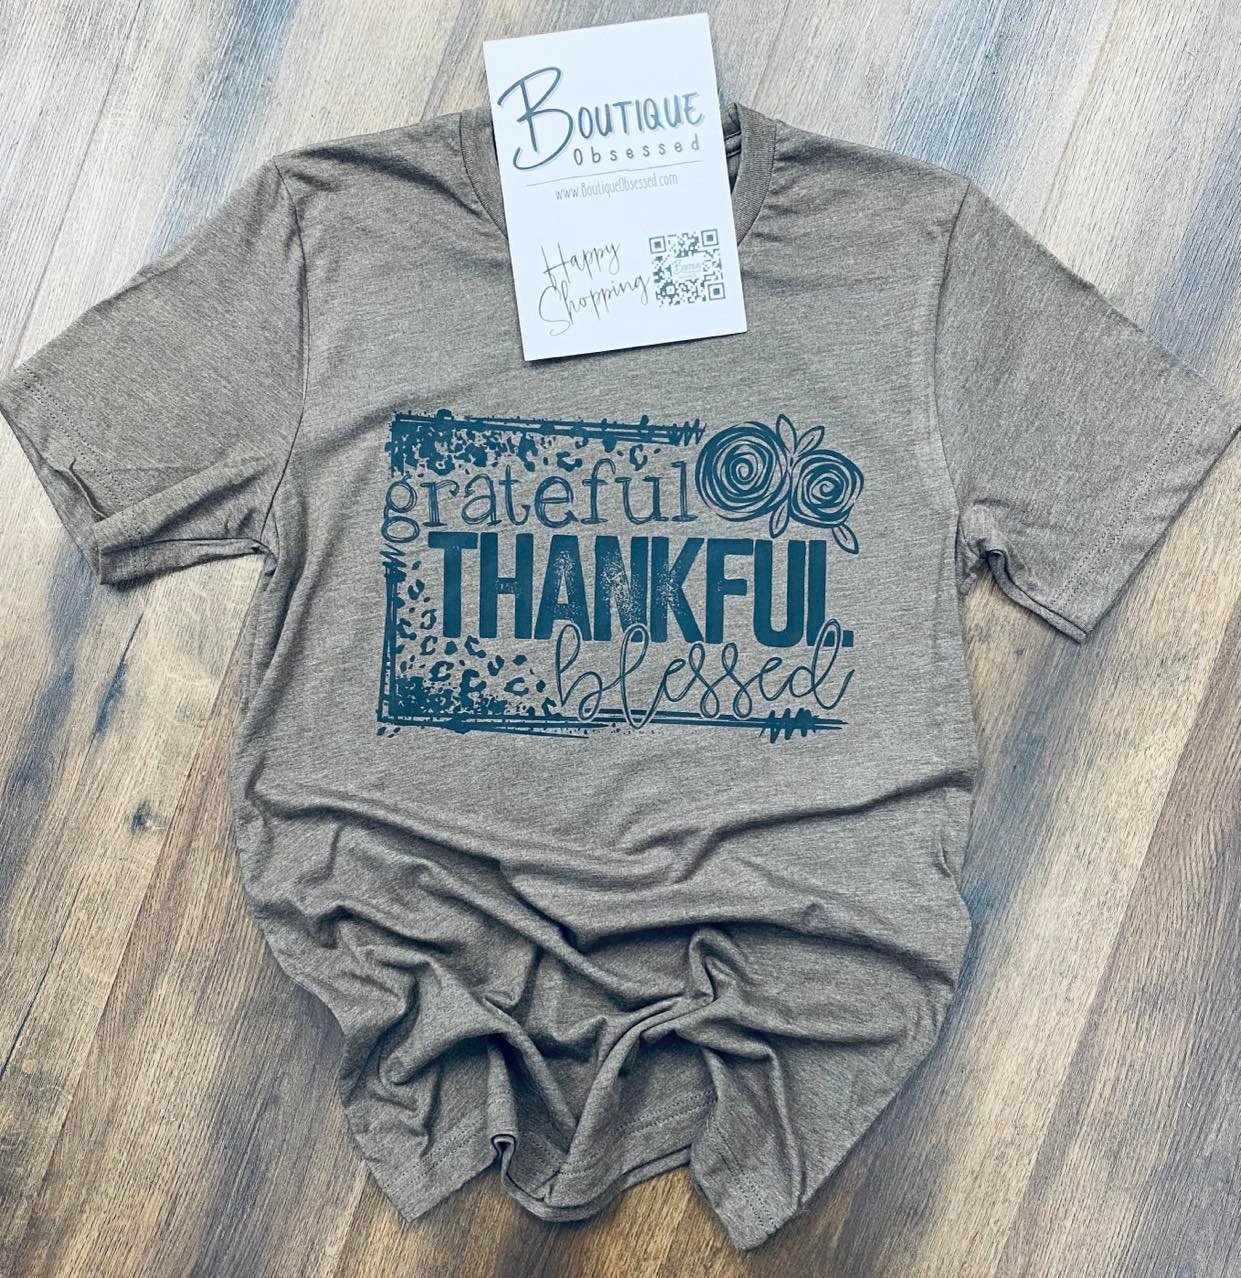 Grateful Thankful Blessed Graphic Tee